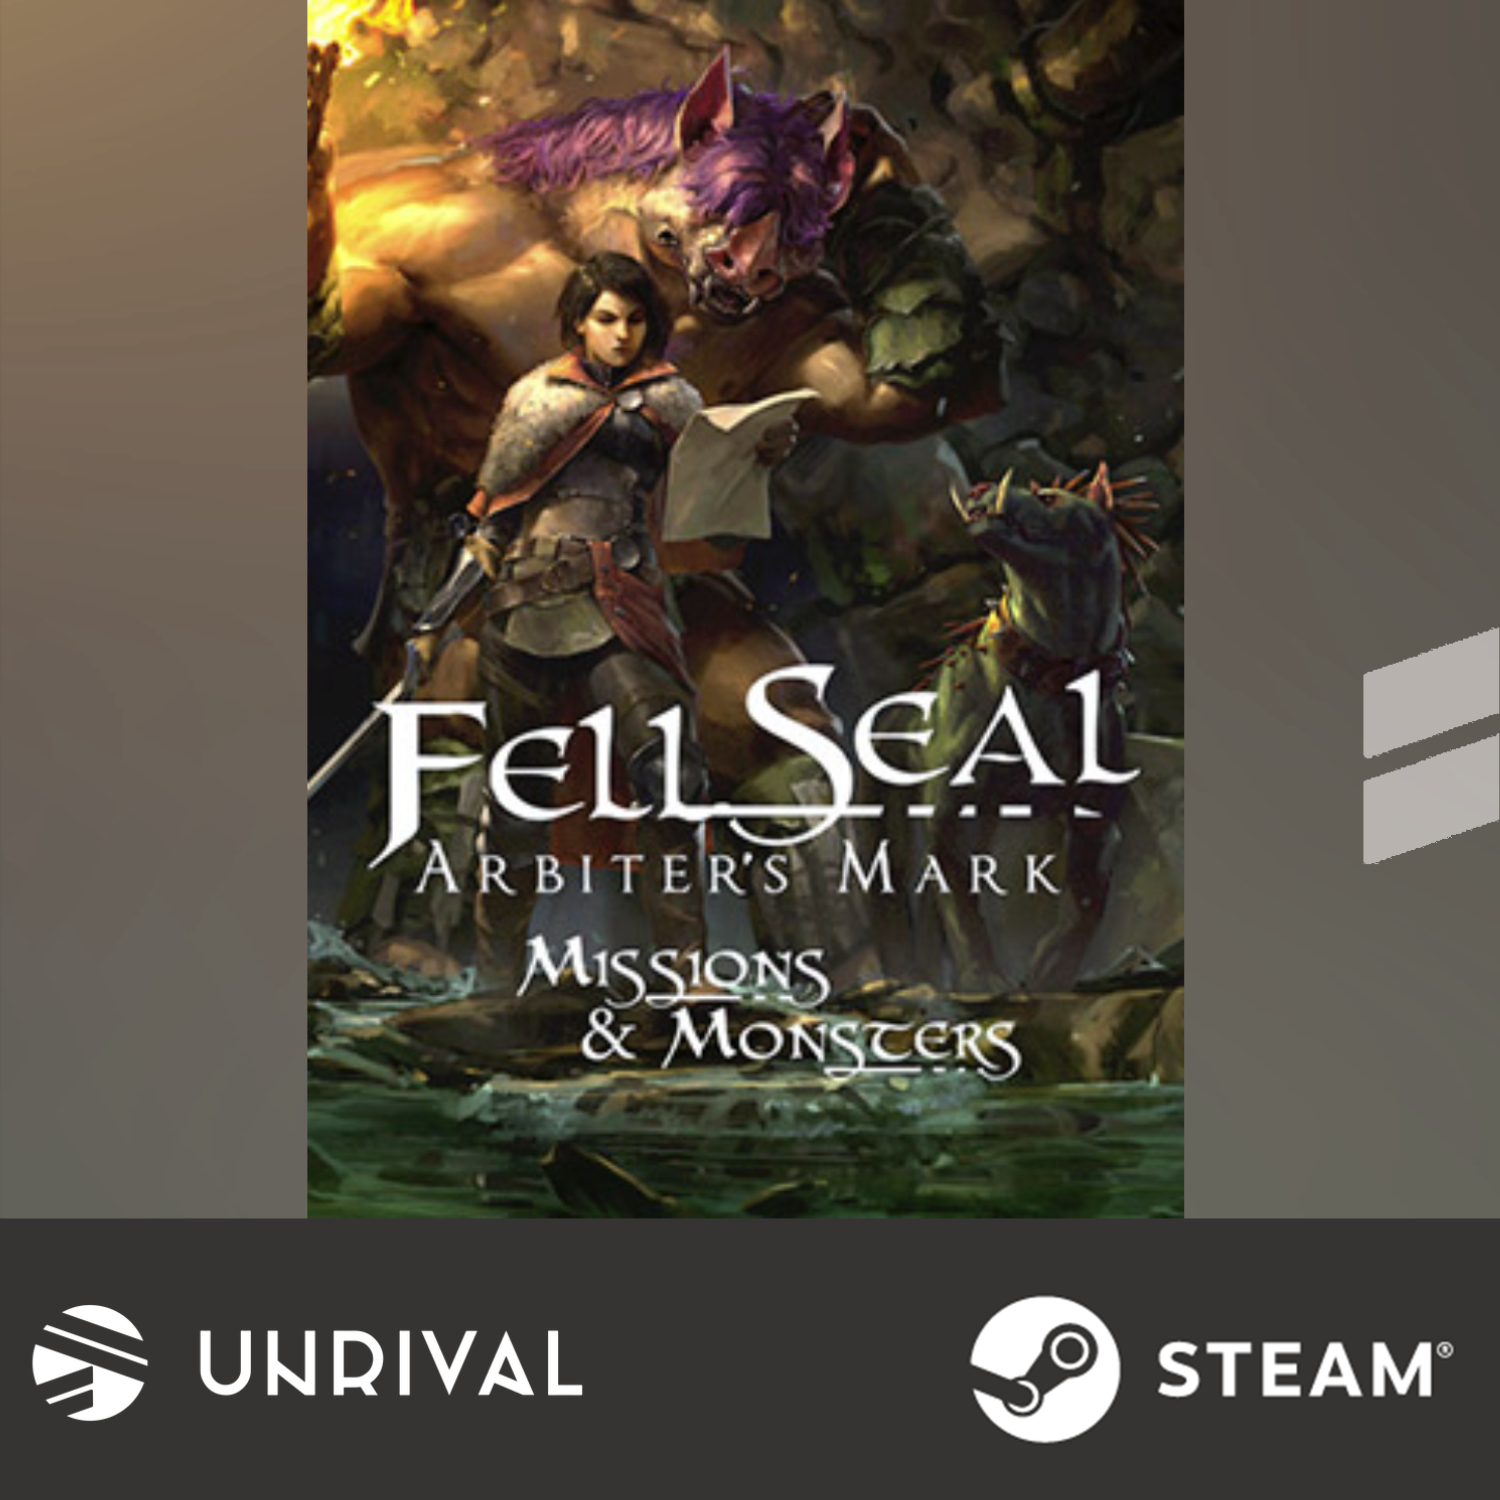 Fell Seal: Arbiter's Mark - Missions and Monsters (DLC) PC Digital Download Game - Unrival